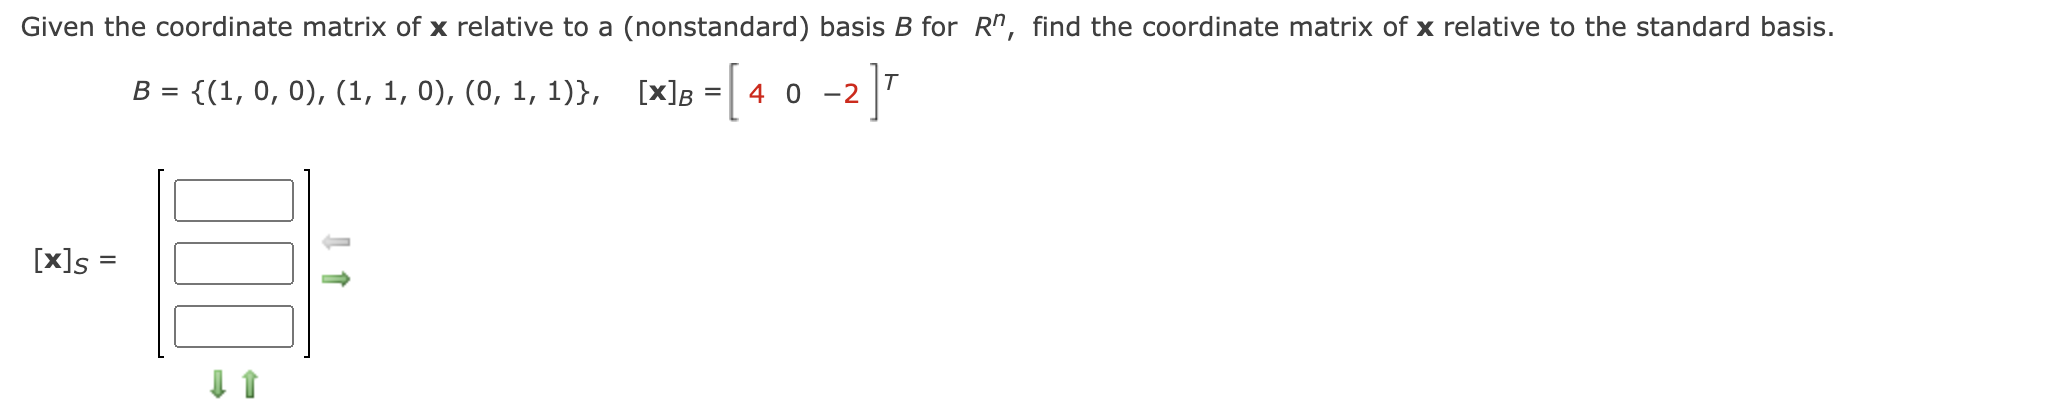 Given the coordinate matrix of x relative to a (nonstandard) basis B for R, find the coordinate matrix of x